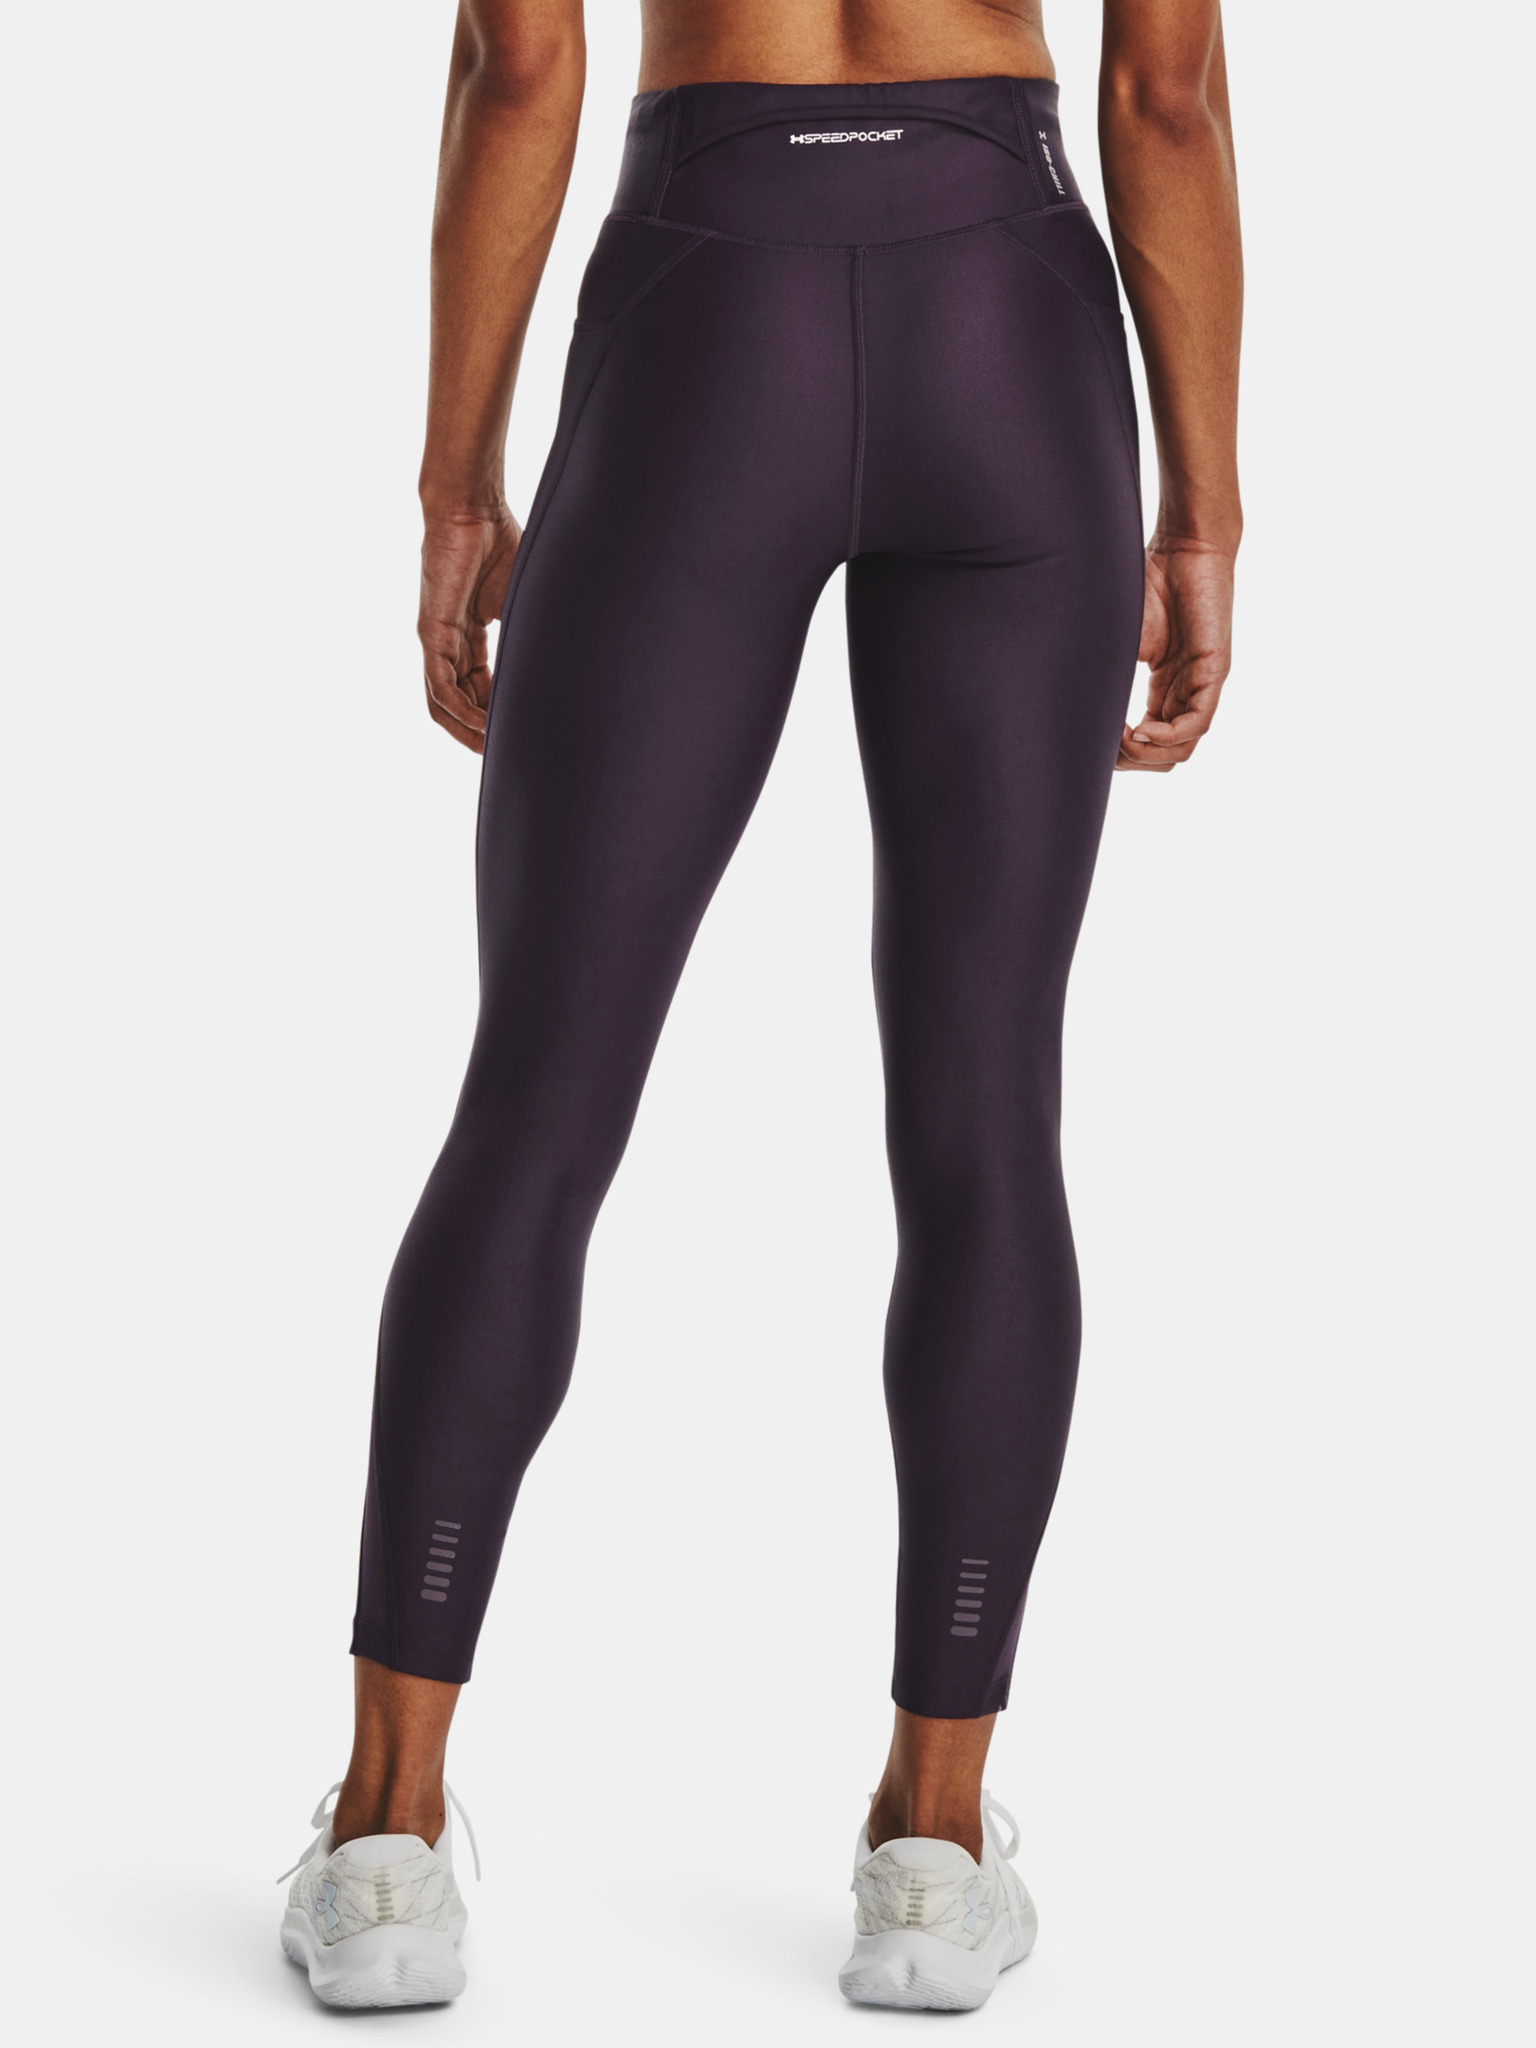 Under Armour - FlyFast Elite Iso-Chill Ankle Tight Leggings